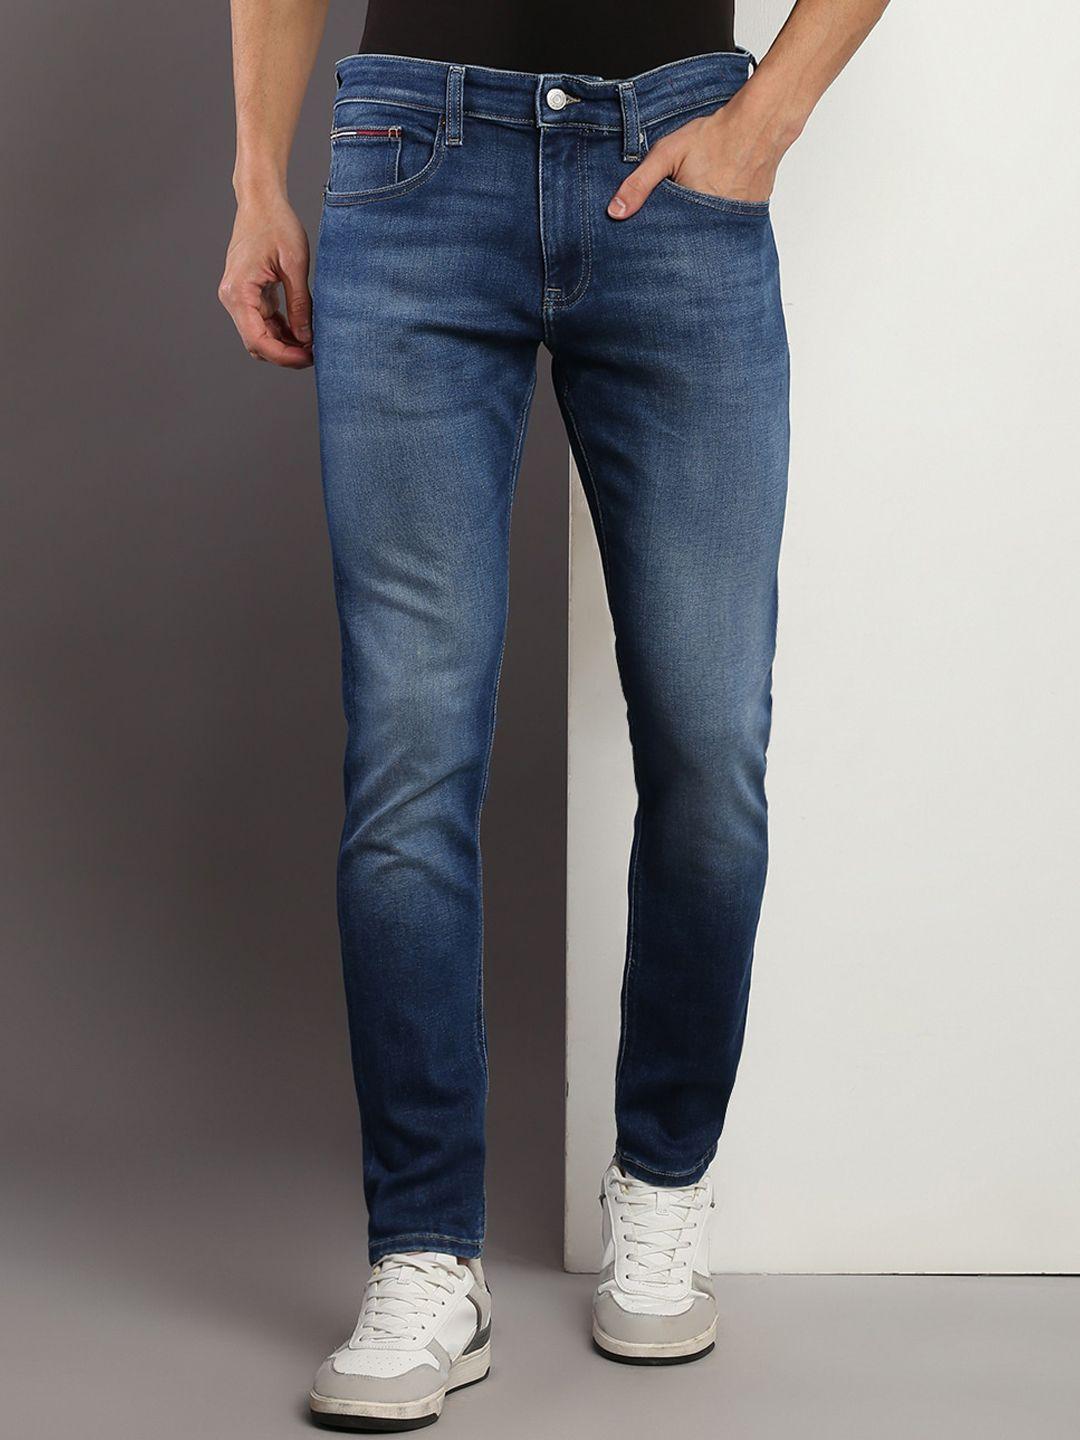 tommy hilfiger men tapered fit light fade stretchable jeans